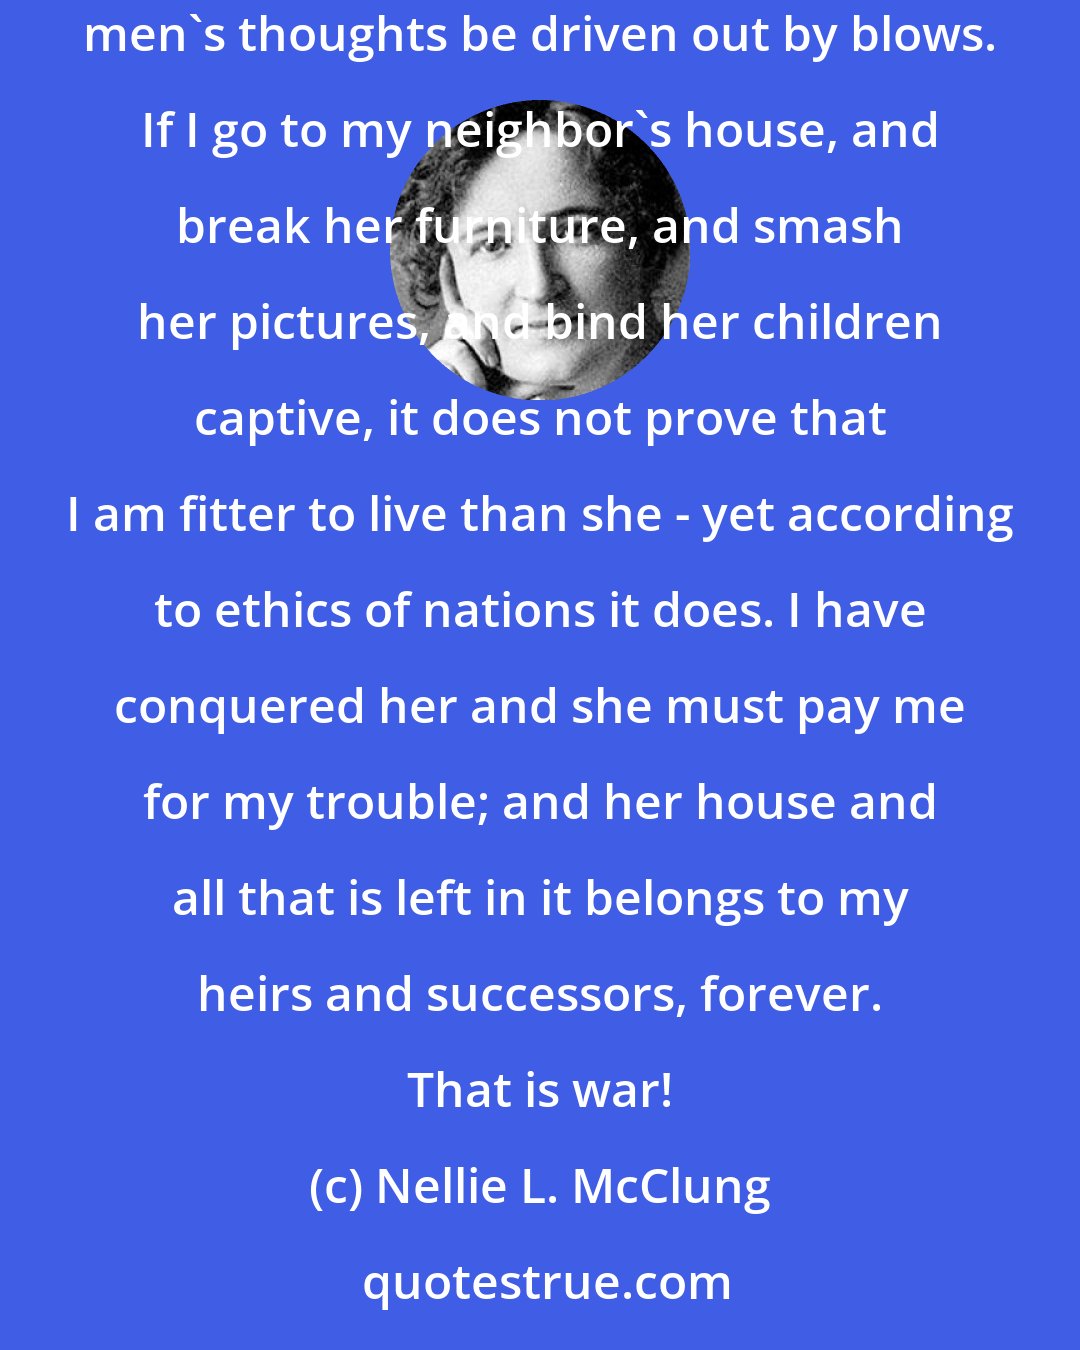 Nellie L. McClung: War proves nothing. To kill a man does not prove that he was in the wrong. Bloodletting cannot change men's spirits, neither can the evil of men's thoughts be driven out by blows. If I go to my neighbor's house, and break her furniture, and smash her pictures, and bind her children captive, it does not prove that I am fitter to live than she - yet according to ethics of nations it does. I have conquered her and she must pay me for my trouble; and her house and all that is left in it belongs to my heirs and successors, forever. That is war!